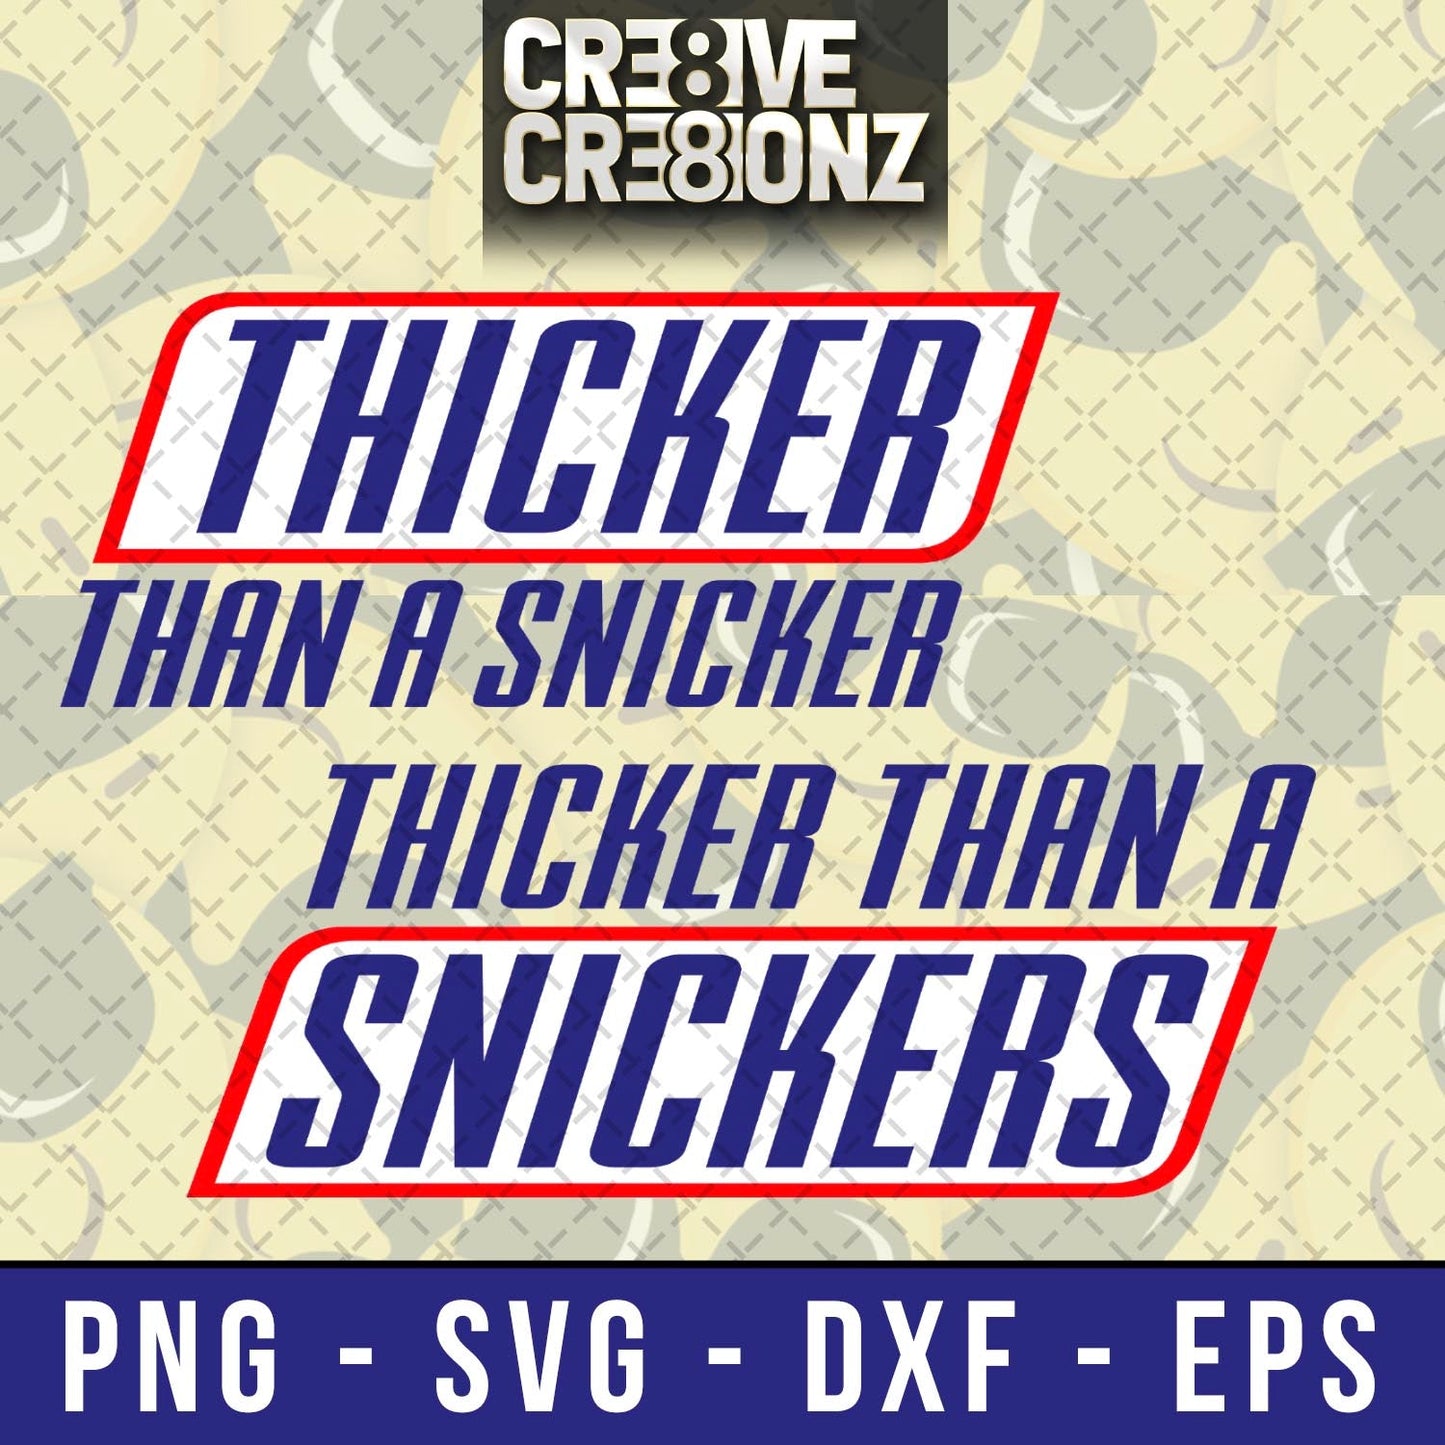 Parody Thicker Snicker SVG - Cre8ive Cre8ionz